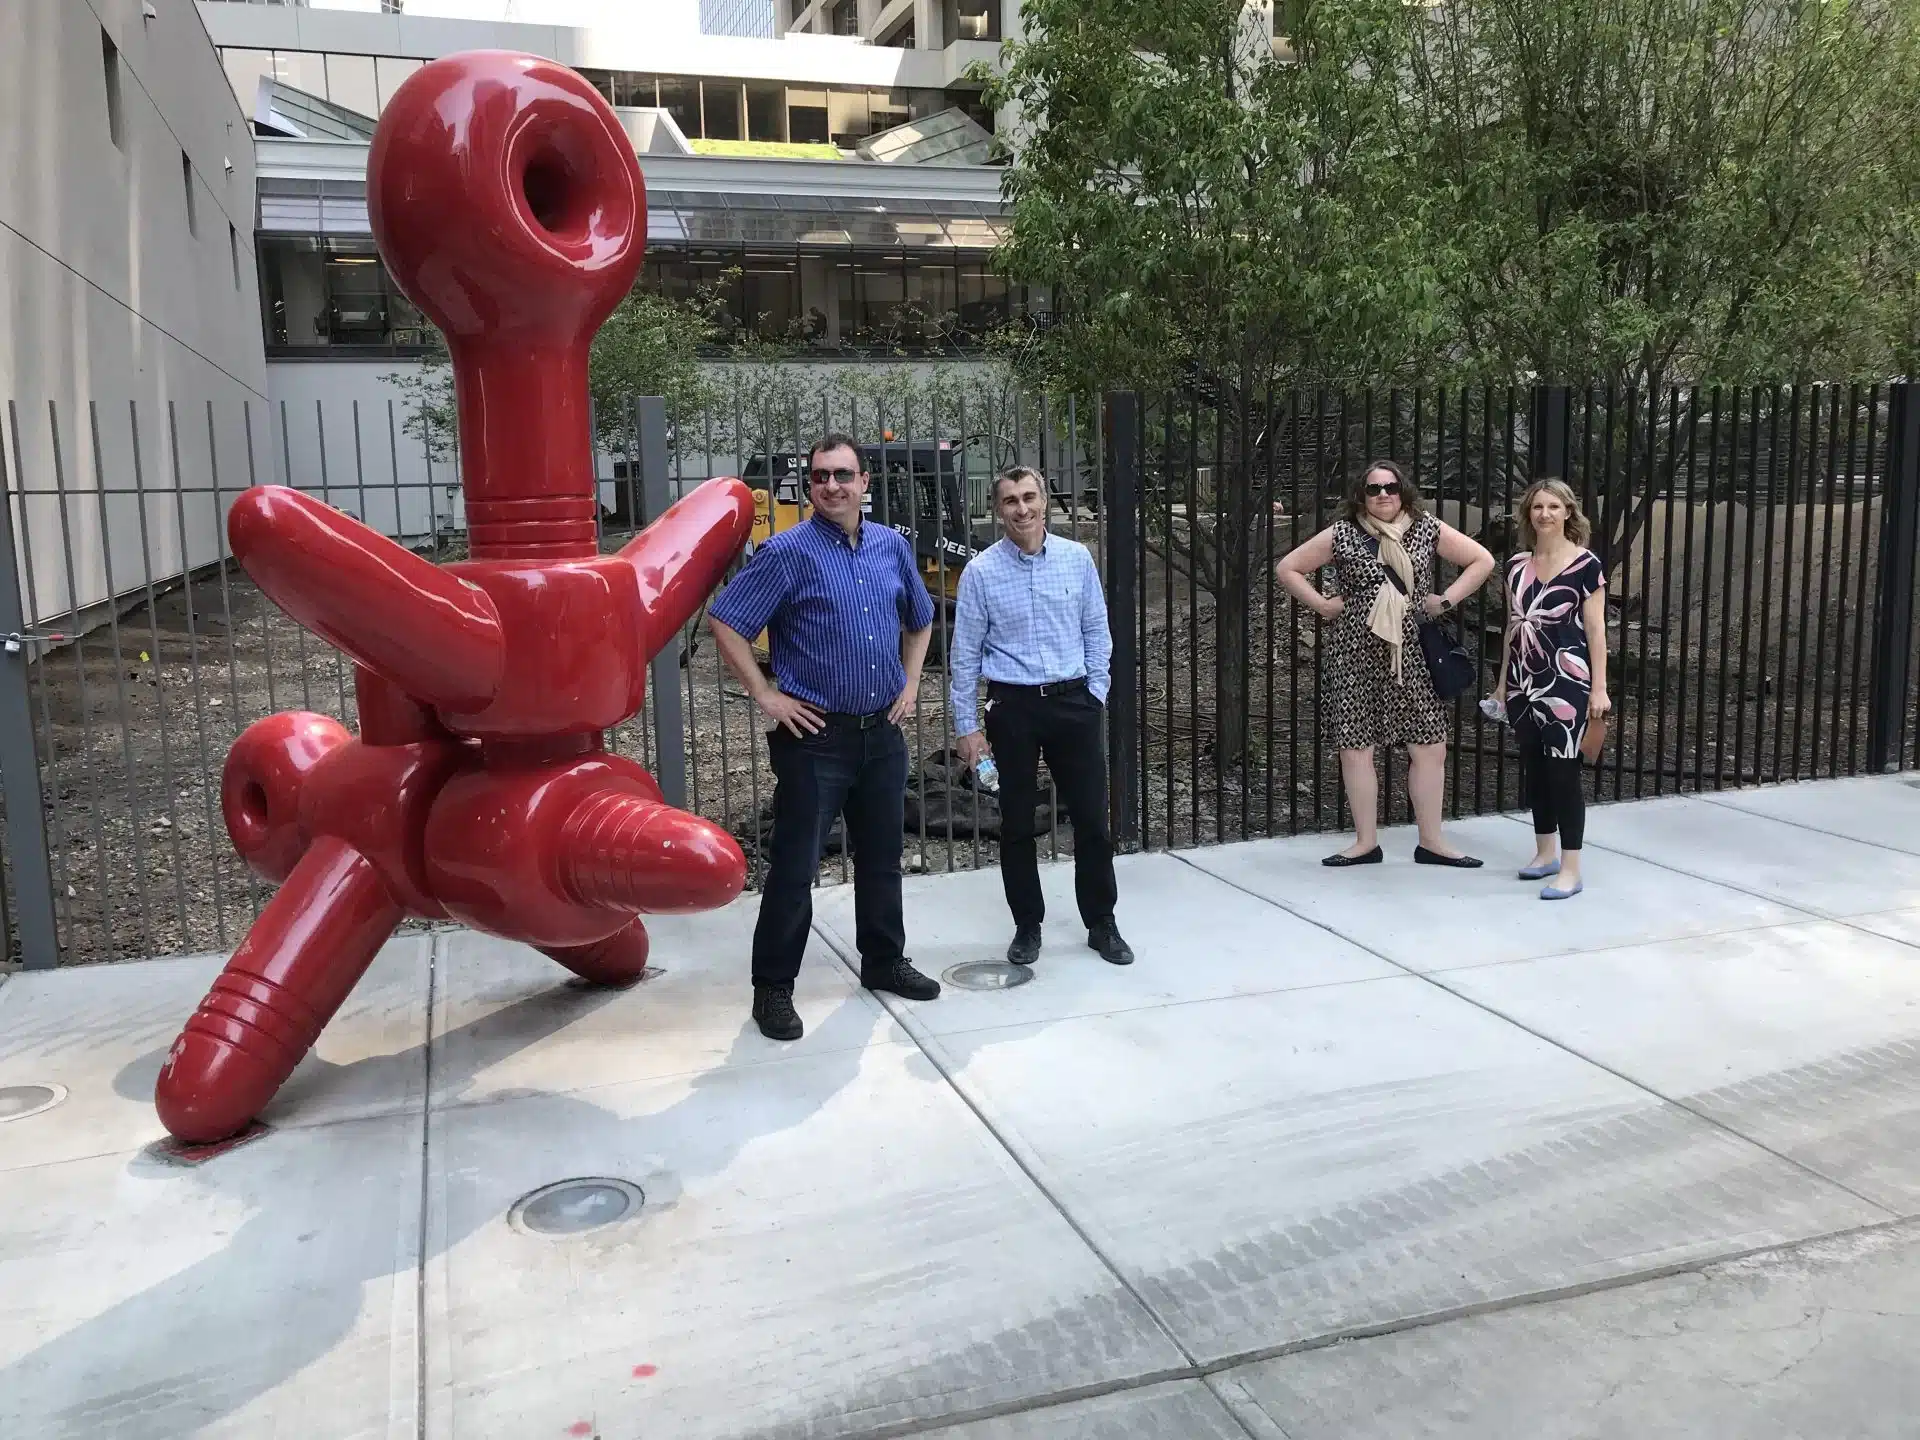 Scavenger hunt team posing with red sculpture in downtown Calgary